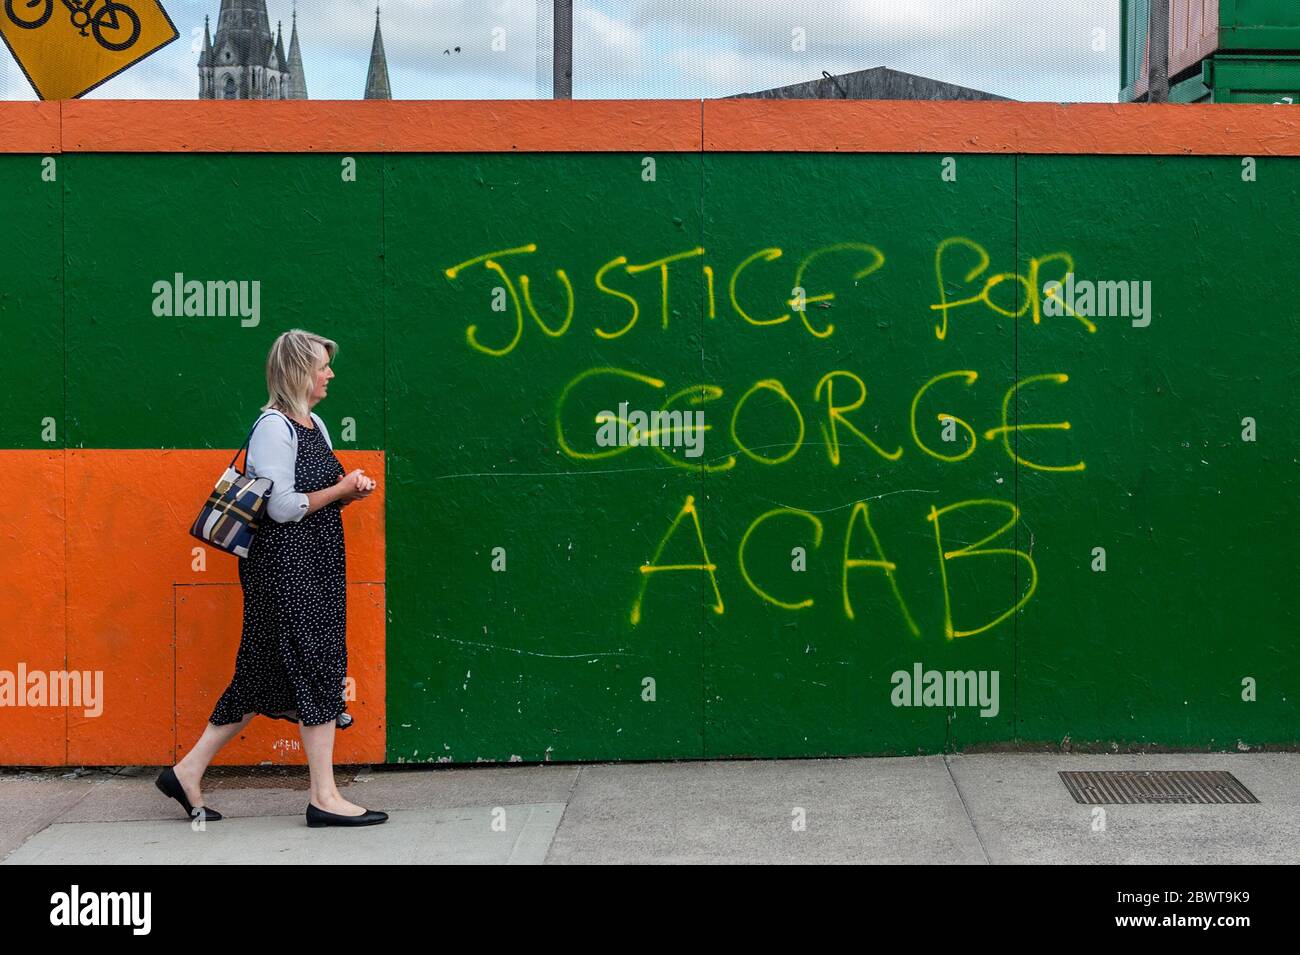 Cork, Ireland. 3rd June, 2020. A woman walks past George Floyd ACAB graffiti in Cork City. The ACAB graffiti is in protest at the killing of George Floyd, an unarmed black man who was murdered by police in Minnesota last week. ACAB has been adopted by protesters and means All Cops Are Bastards. Credit: AG News/Alamy Live News Stock Photo